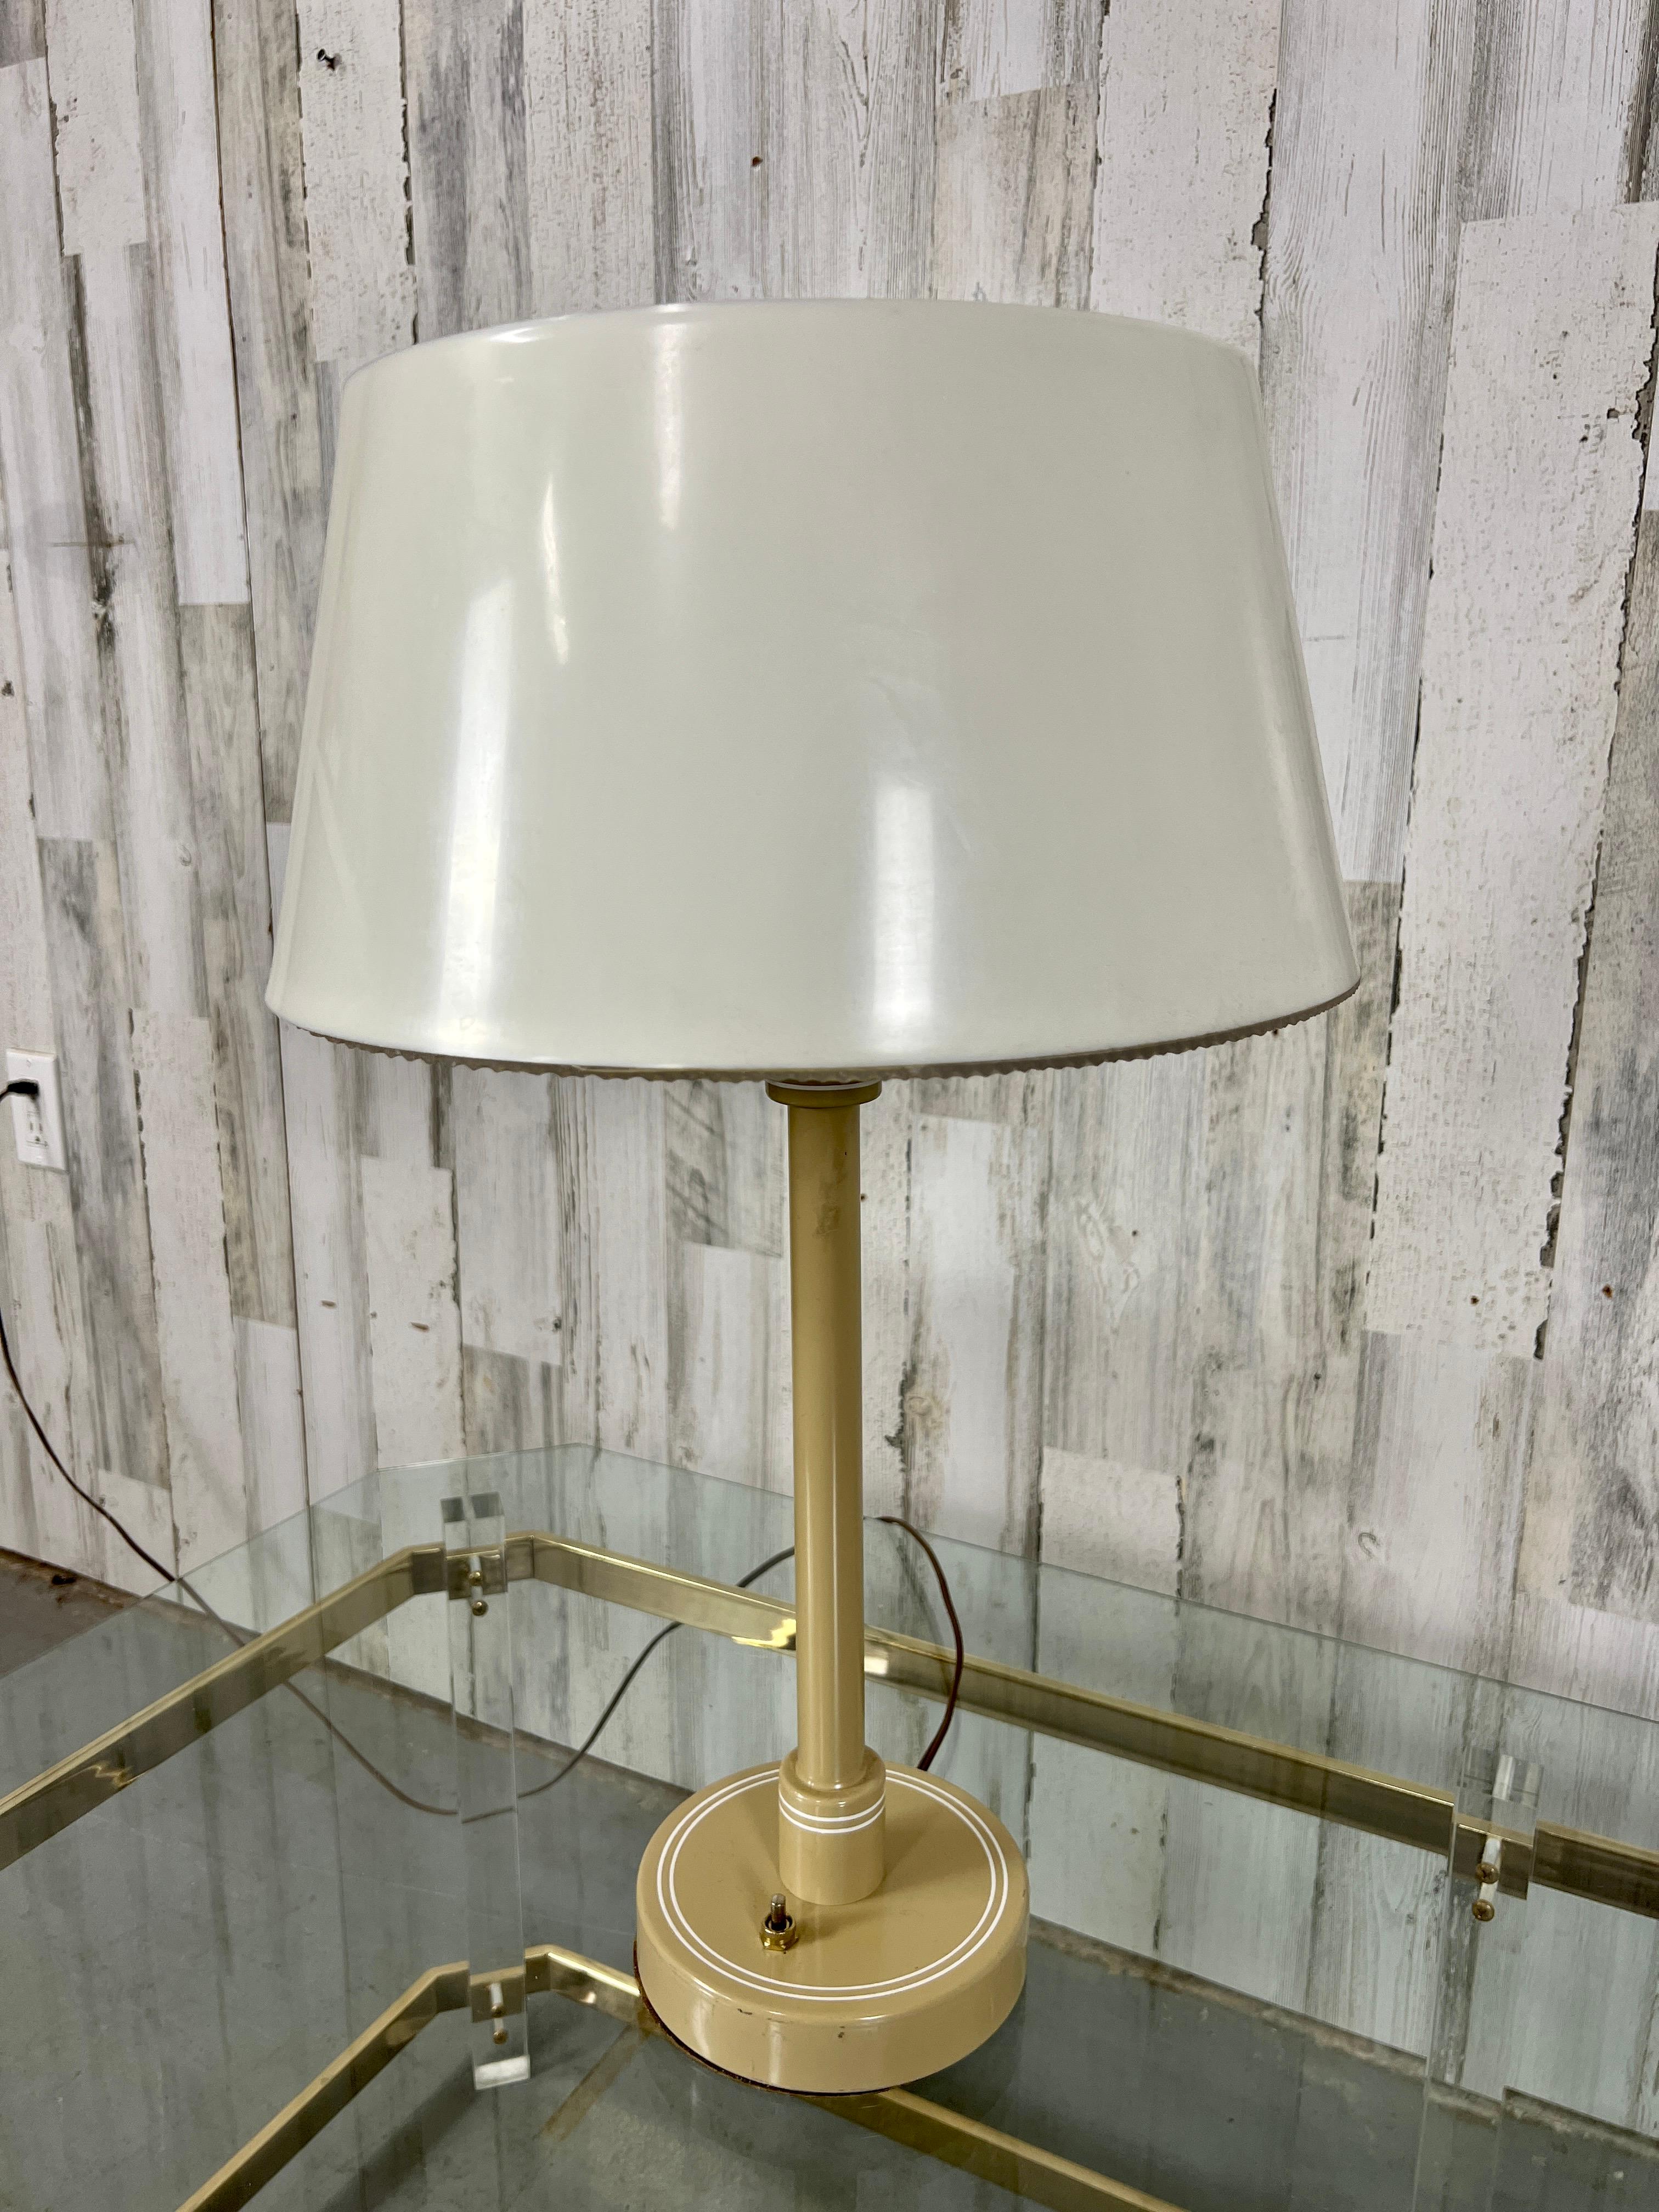 North American 1960s Plastic Drum Shade Table Lamp For Sale